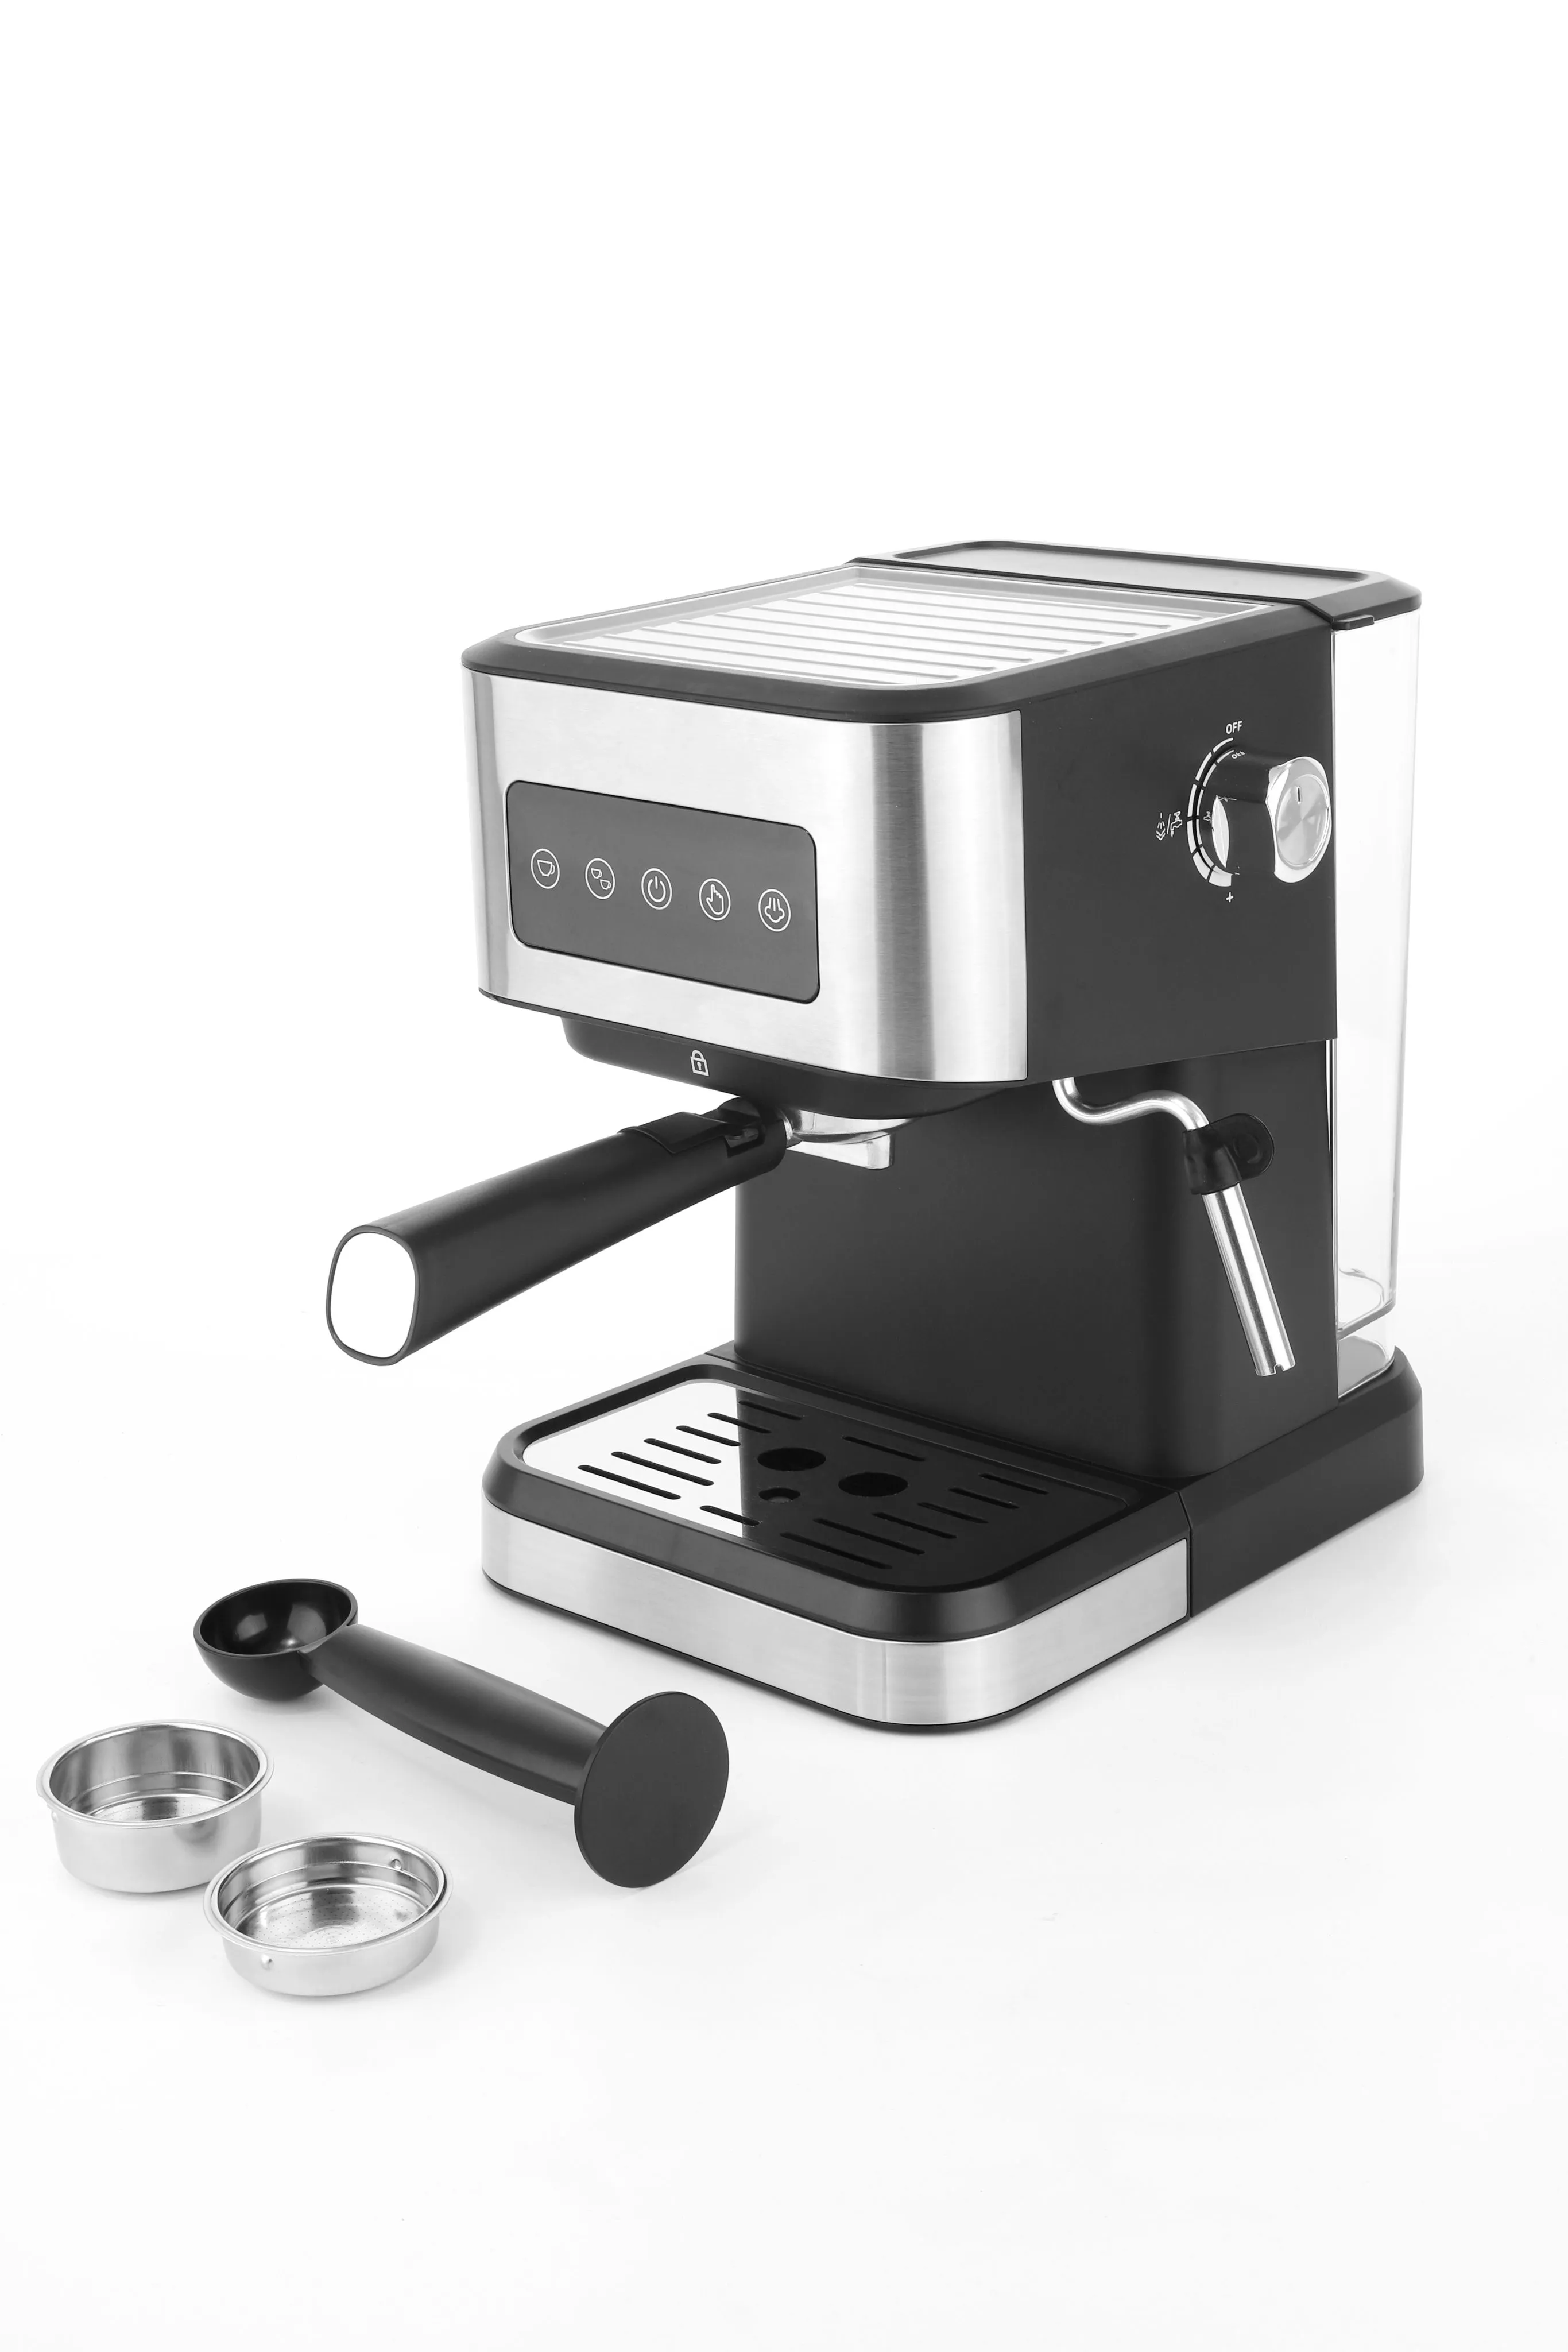 2022 New arrival coffee maker 